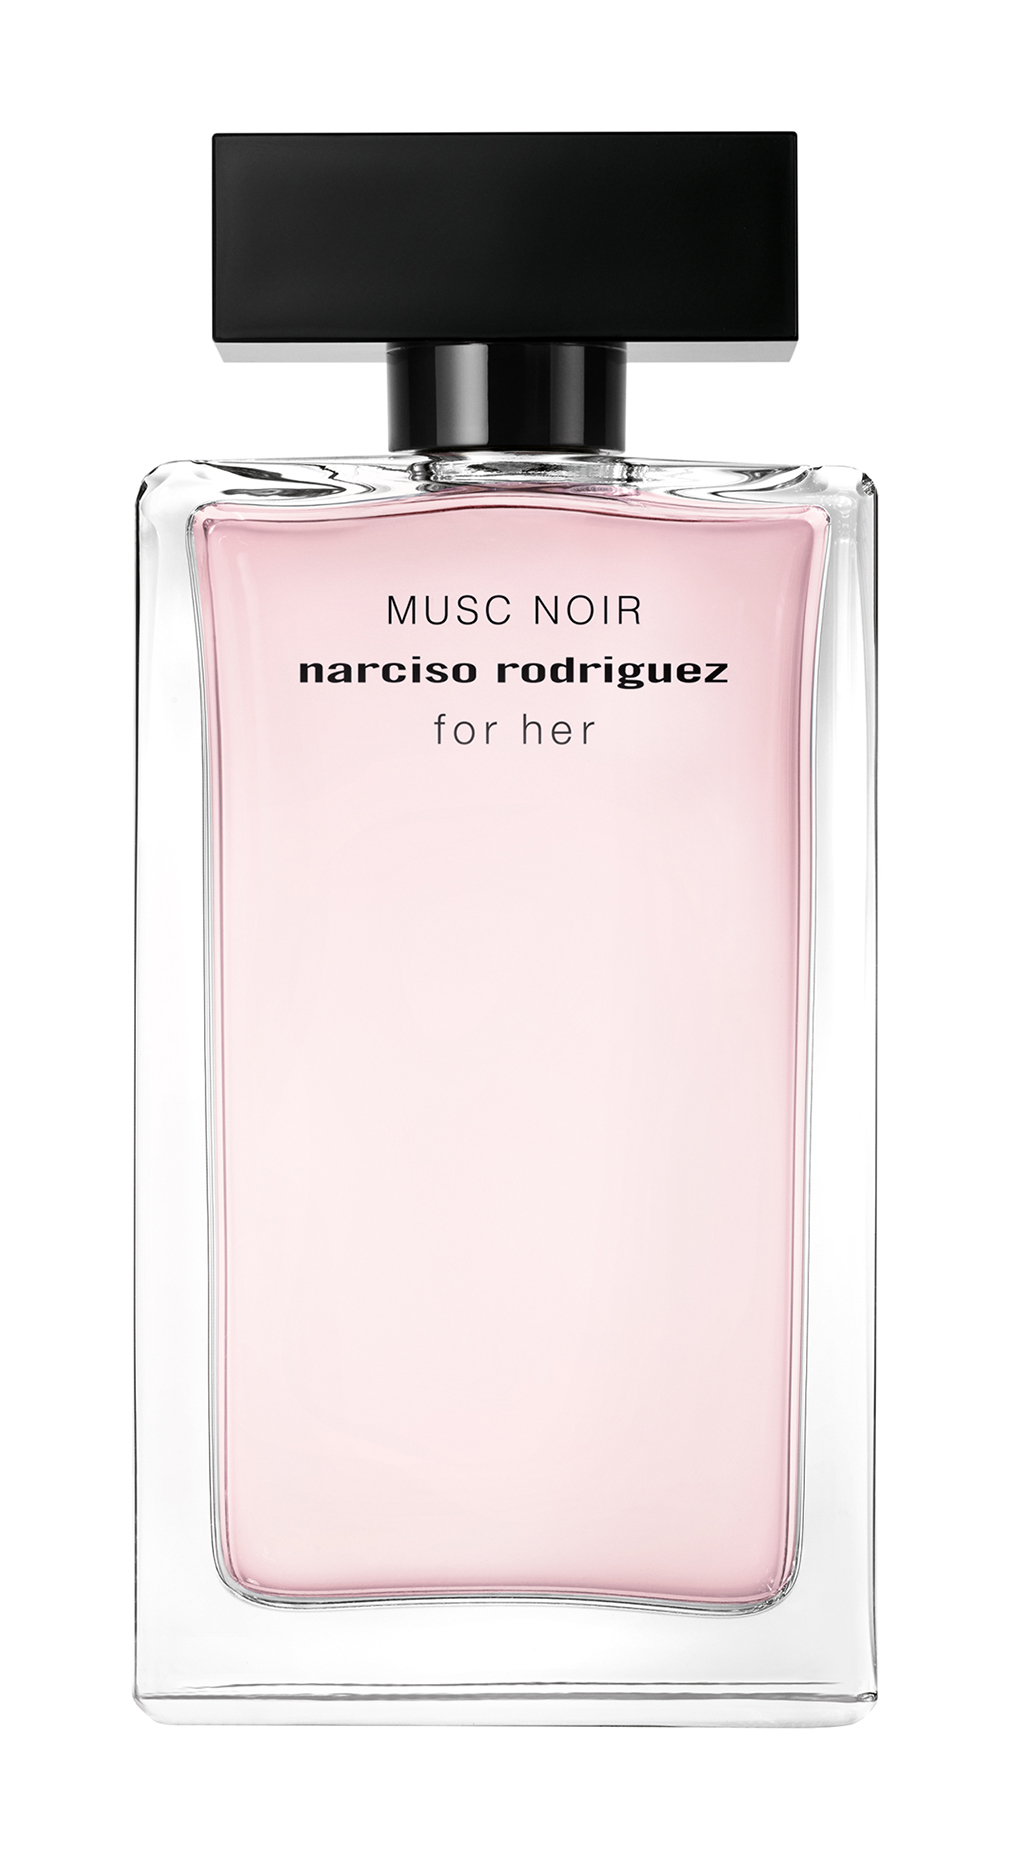 Narciso Rodriguez for her. Narciso Rodriguez Musc for her. Narciso Rodriguez for her Eau de Parfum парфюмерная вода 100 мл. Narciso Rodriguez Narciso. Парфюм narciso rodriguez